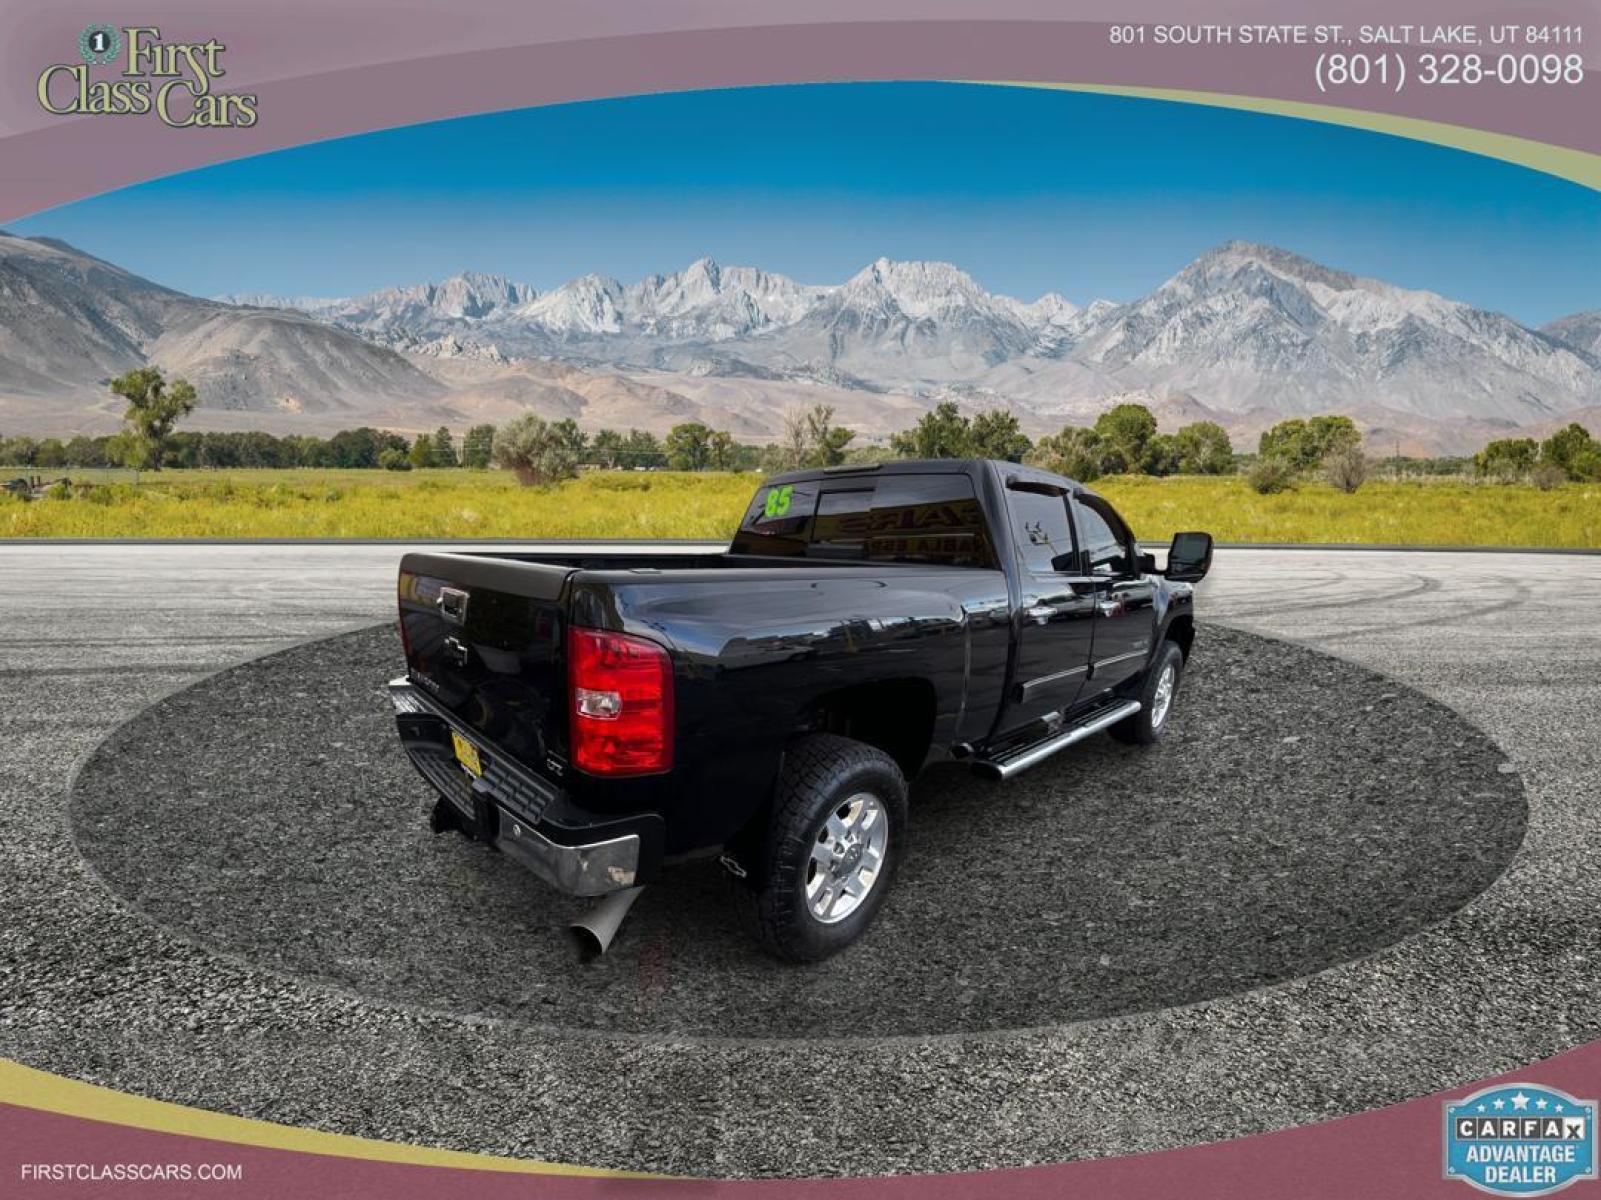 2012 Black /Black Chevrolet Silverado 3500HD (1GC4K1E81CF) , Allison Transmission transmission, located at 801 South State Street, Salt Lake City, UT, 84111, (801) 328-0098, 40.751953, -111.888206 - 3500HD LTZ DURAMAX DIESEL 6.6L, Loaded with features, 4x4, ALLISON TRANSMISSION, GREAT TIRES, BED LINER, LEATHER SEATS, BACKUP CAMERA, POWER SEATS, POWER LOCKS, POWER WINDOWS, Parking Sensors, AM/FM Aux input, Blutooth, GPS Navigation system, Rear Entertainment system, - Photo #3